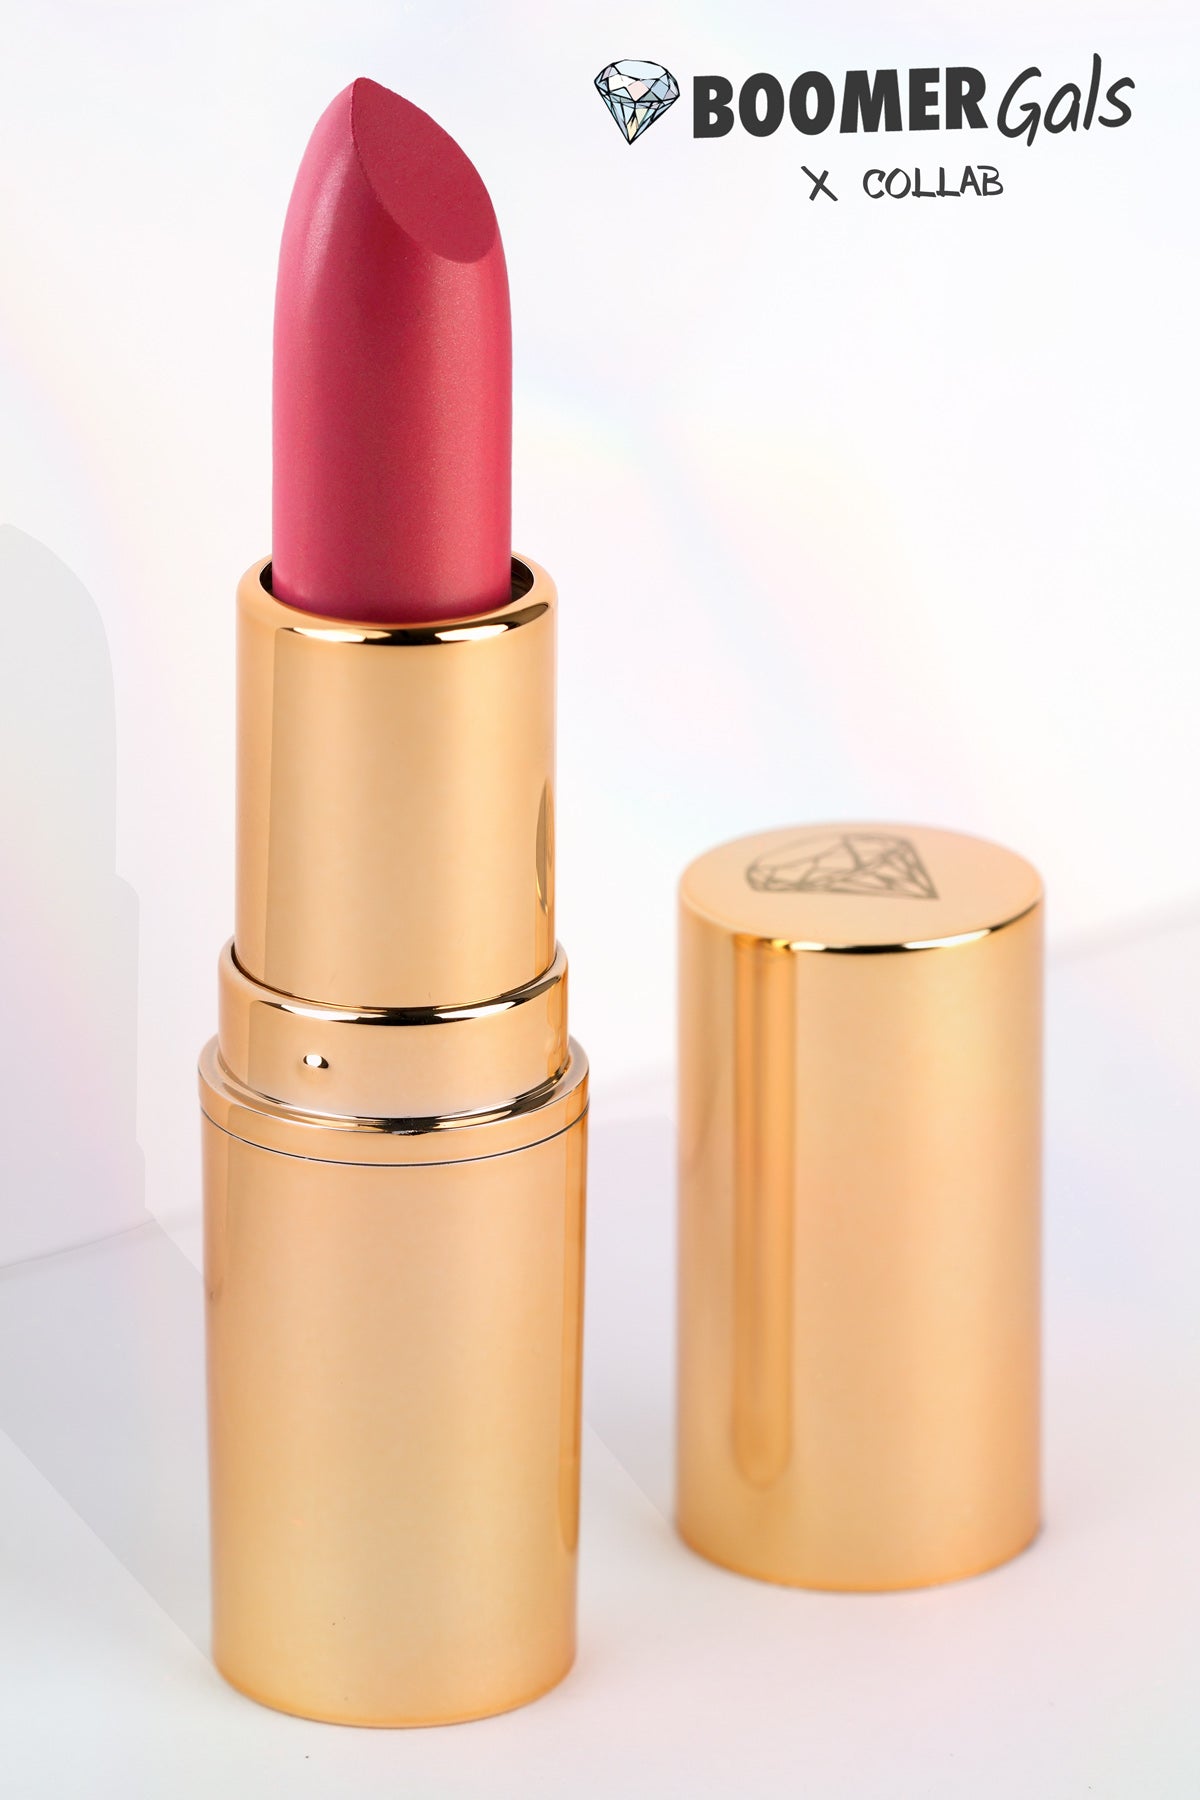 'Lisa's Luxe Raspberry' Boomer Gals - Ultra Lux Hydrating Lipstick